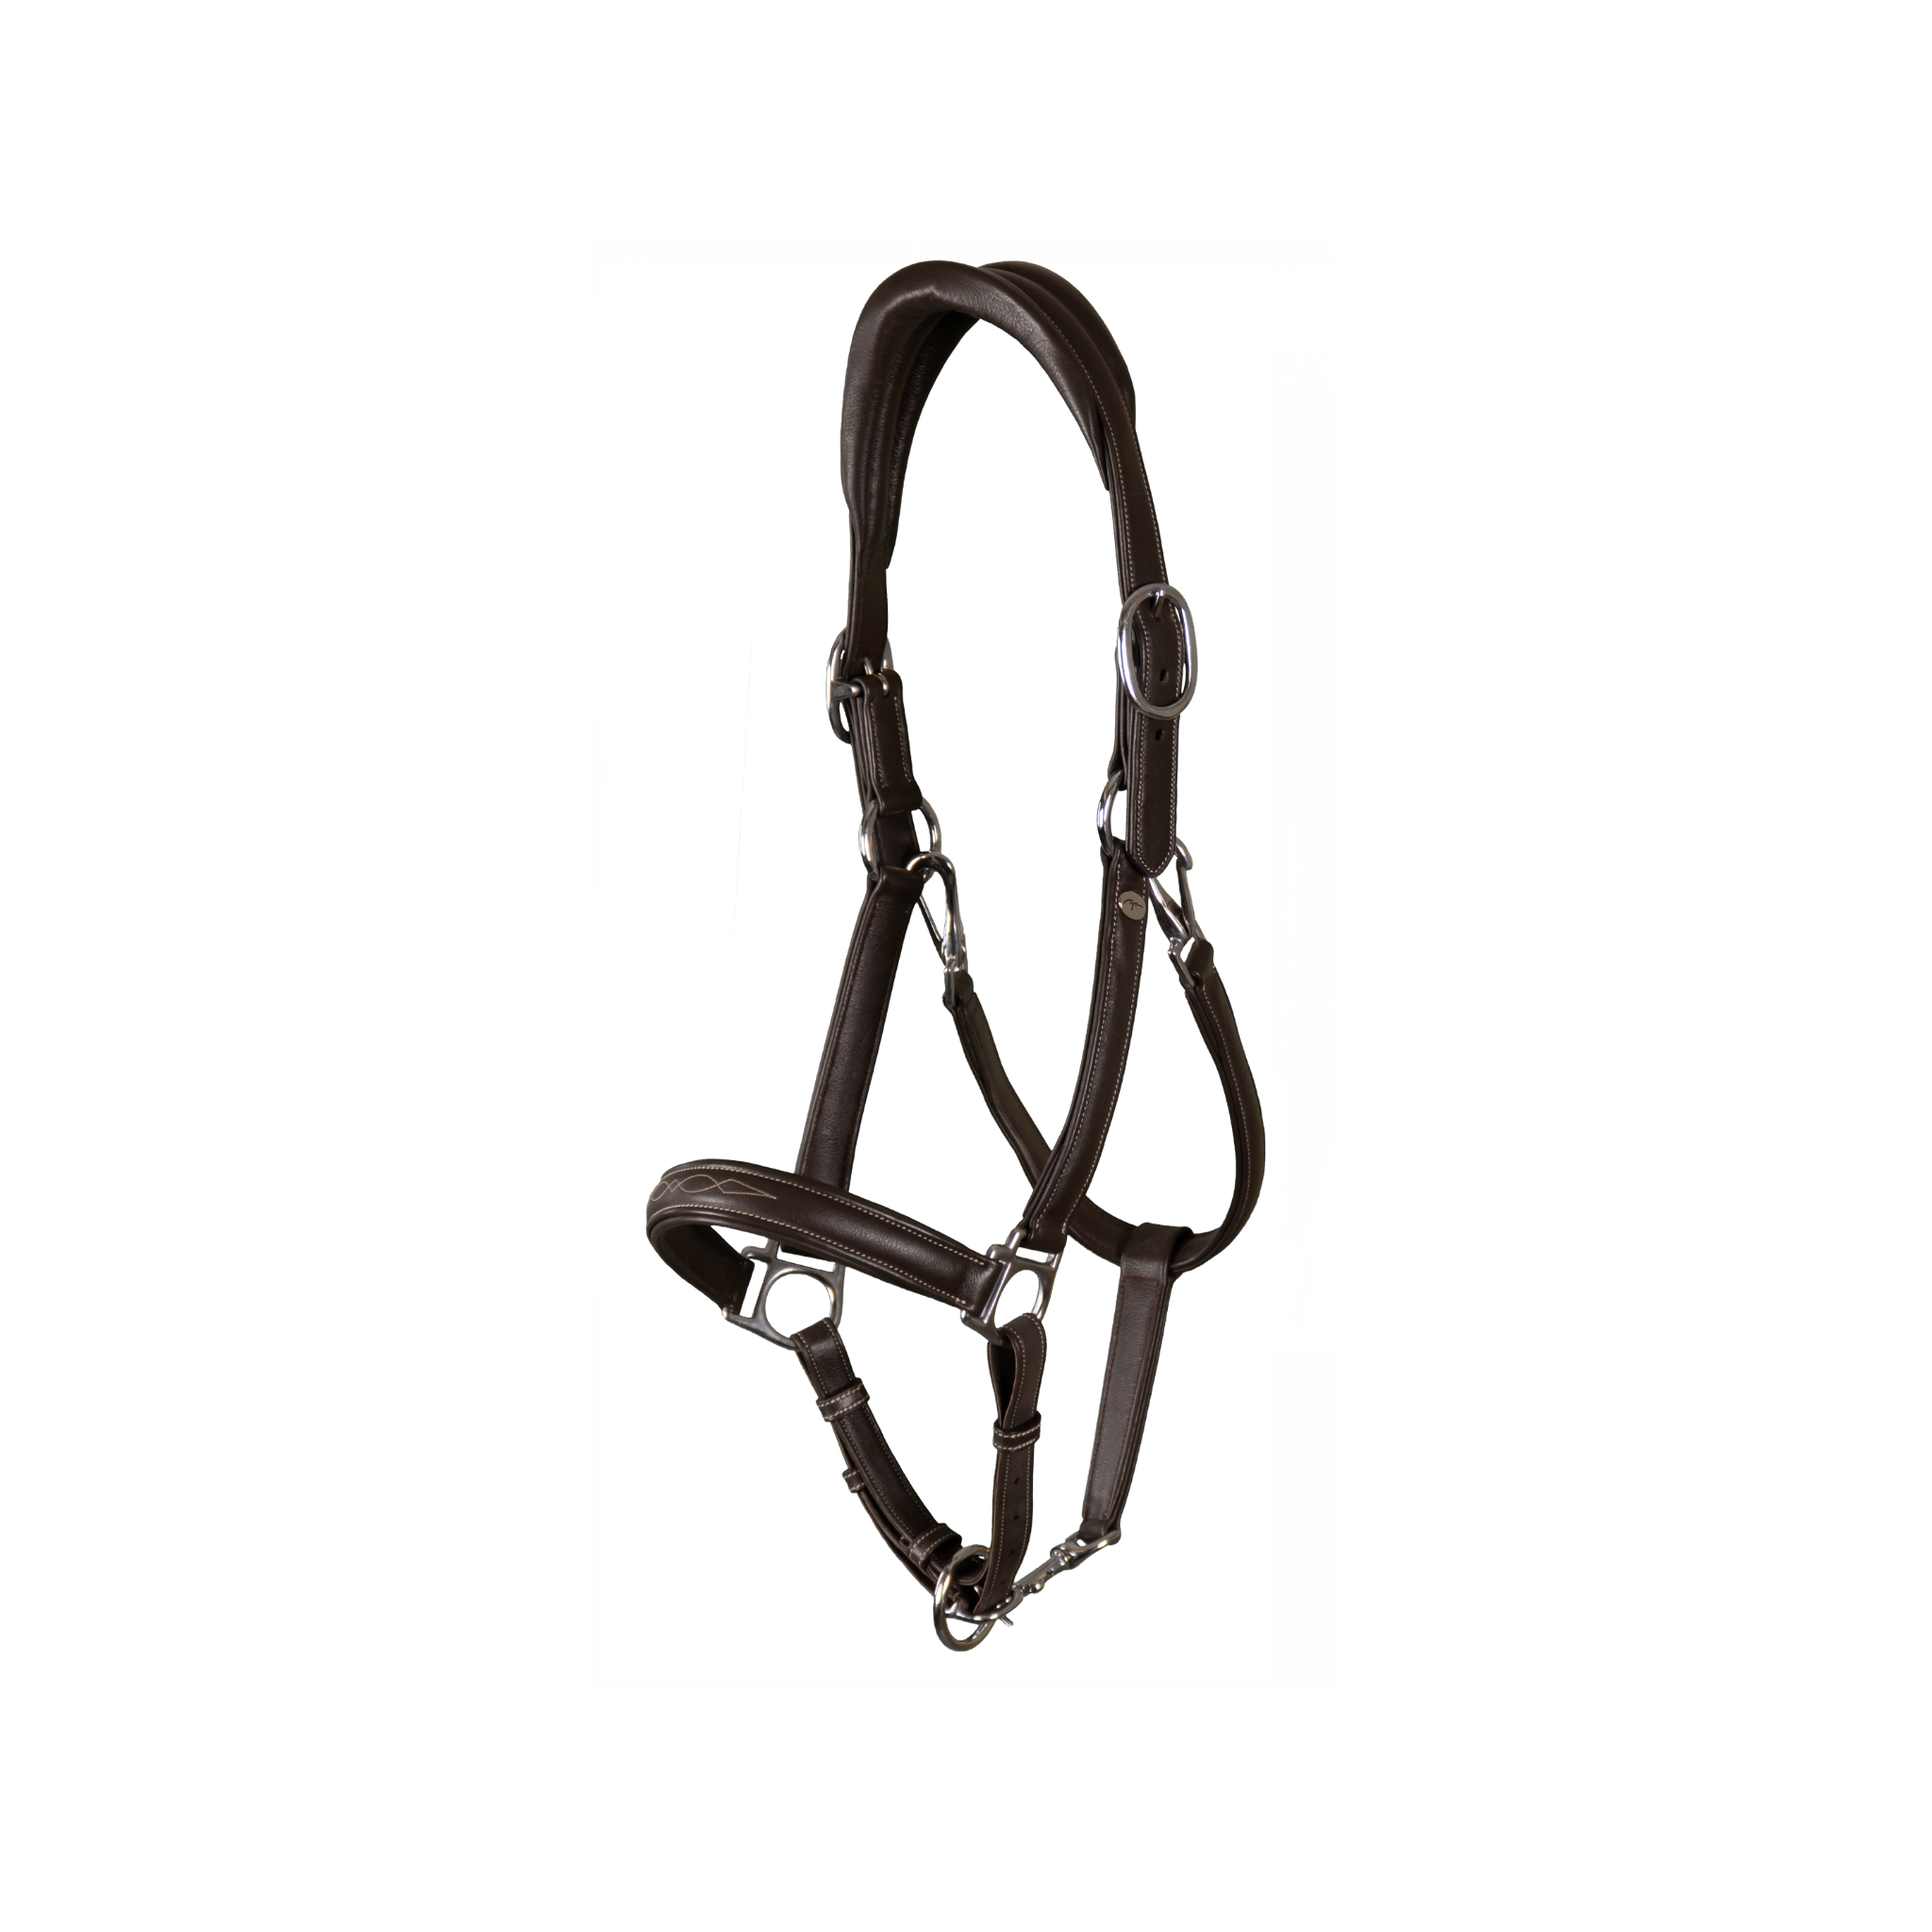 product shot image of the Working Collection 2-in-1 Transport & Grooming Headcollar